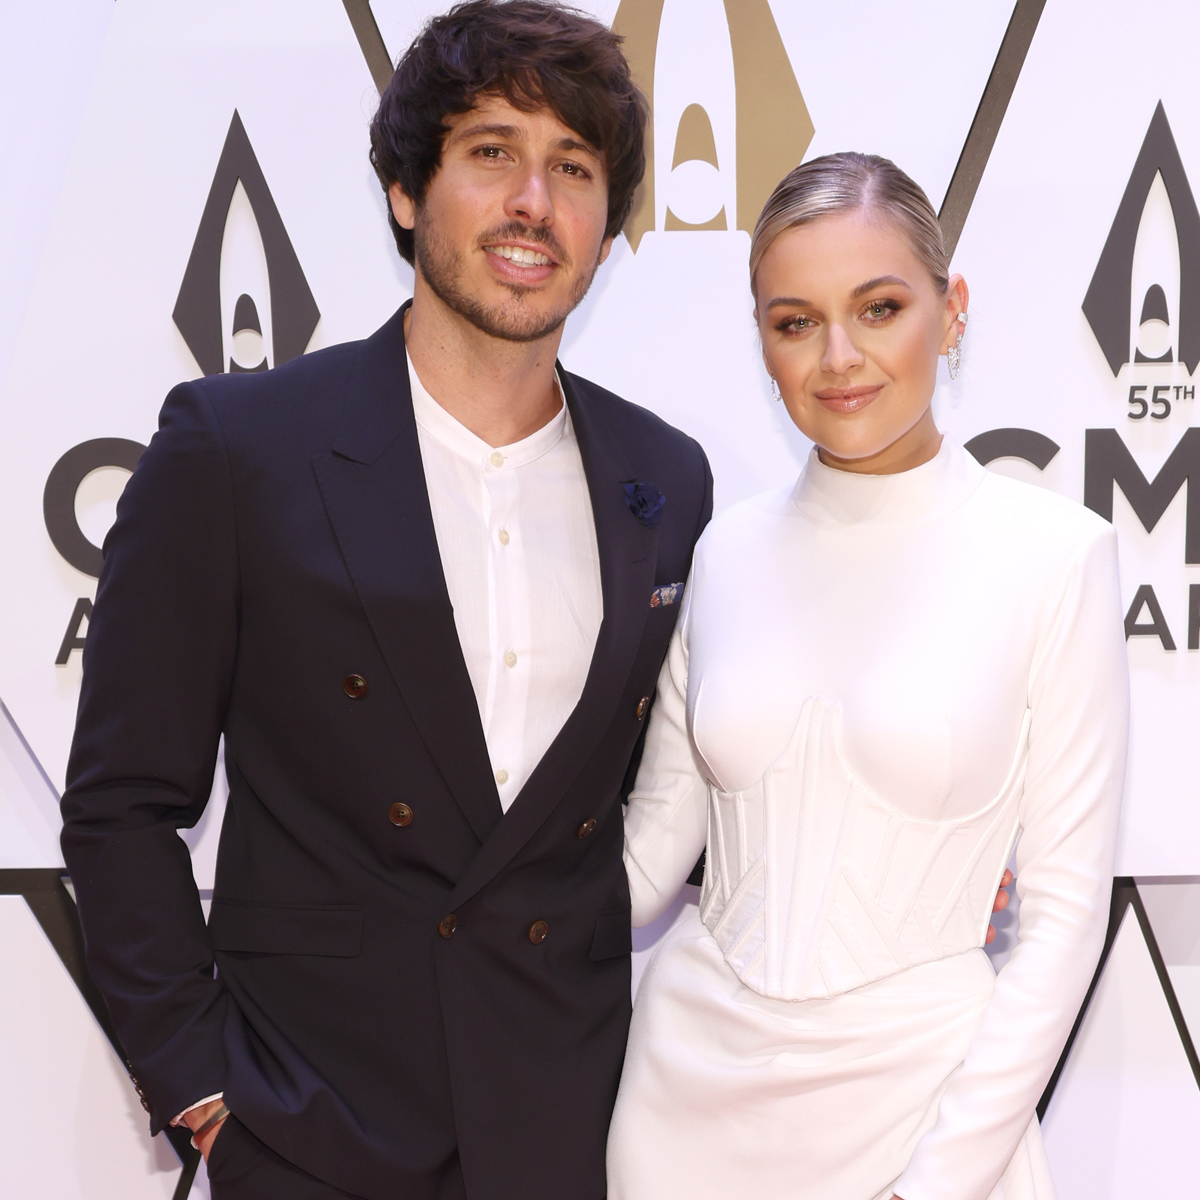 Kelsea Ballerini and Morgan Evans Break Up After Nearly 5 Years of Marriage